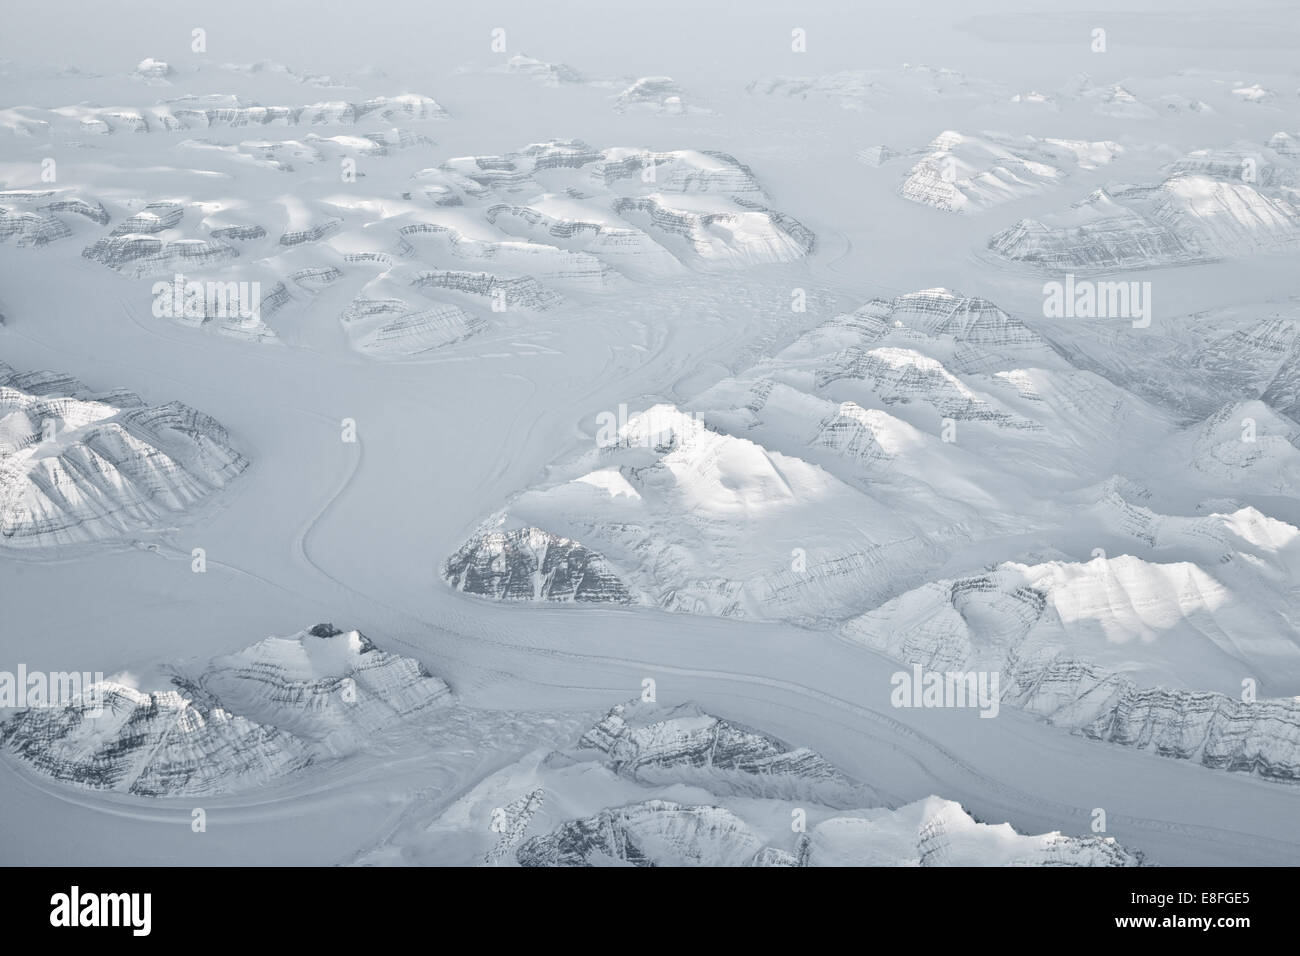 Aerial view of Snowcapped mountains, Greenland Stock Photo